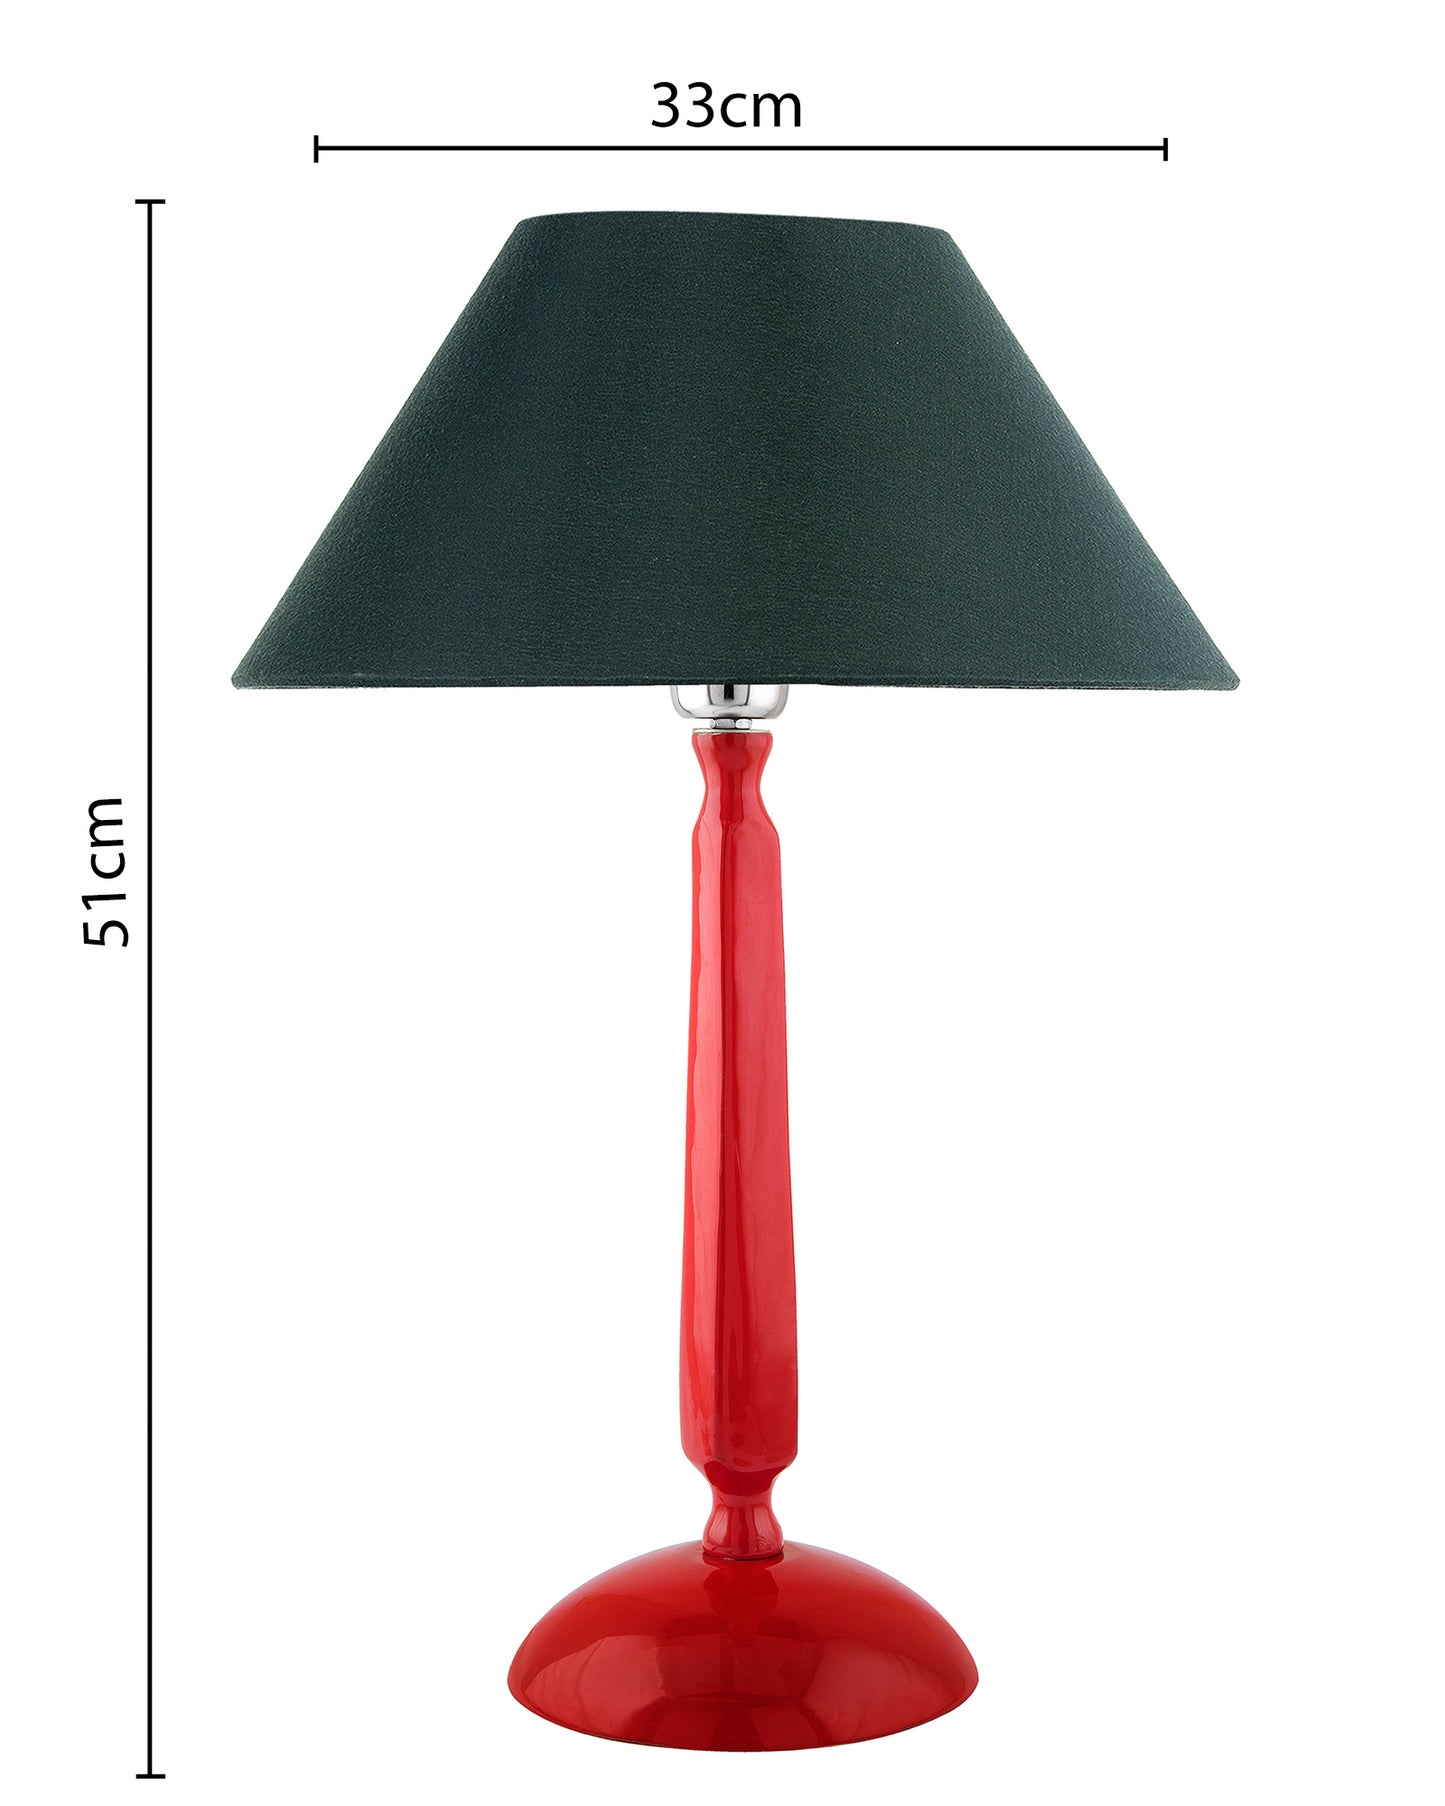 Glossy Red Cubist Aluminium Table Lamp With Cone Shade, Bedside, Living Room Study Lamp, Bulb Included